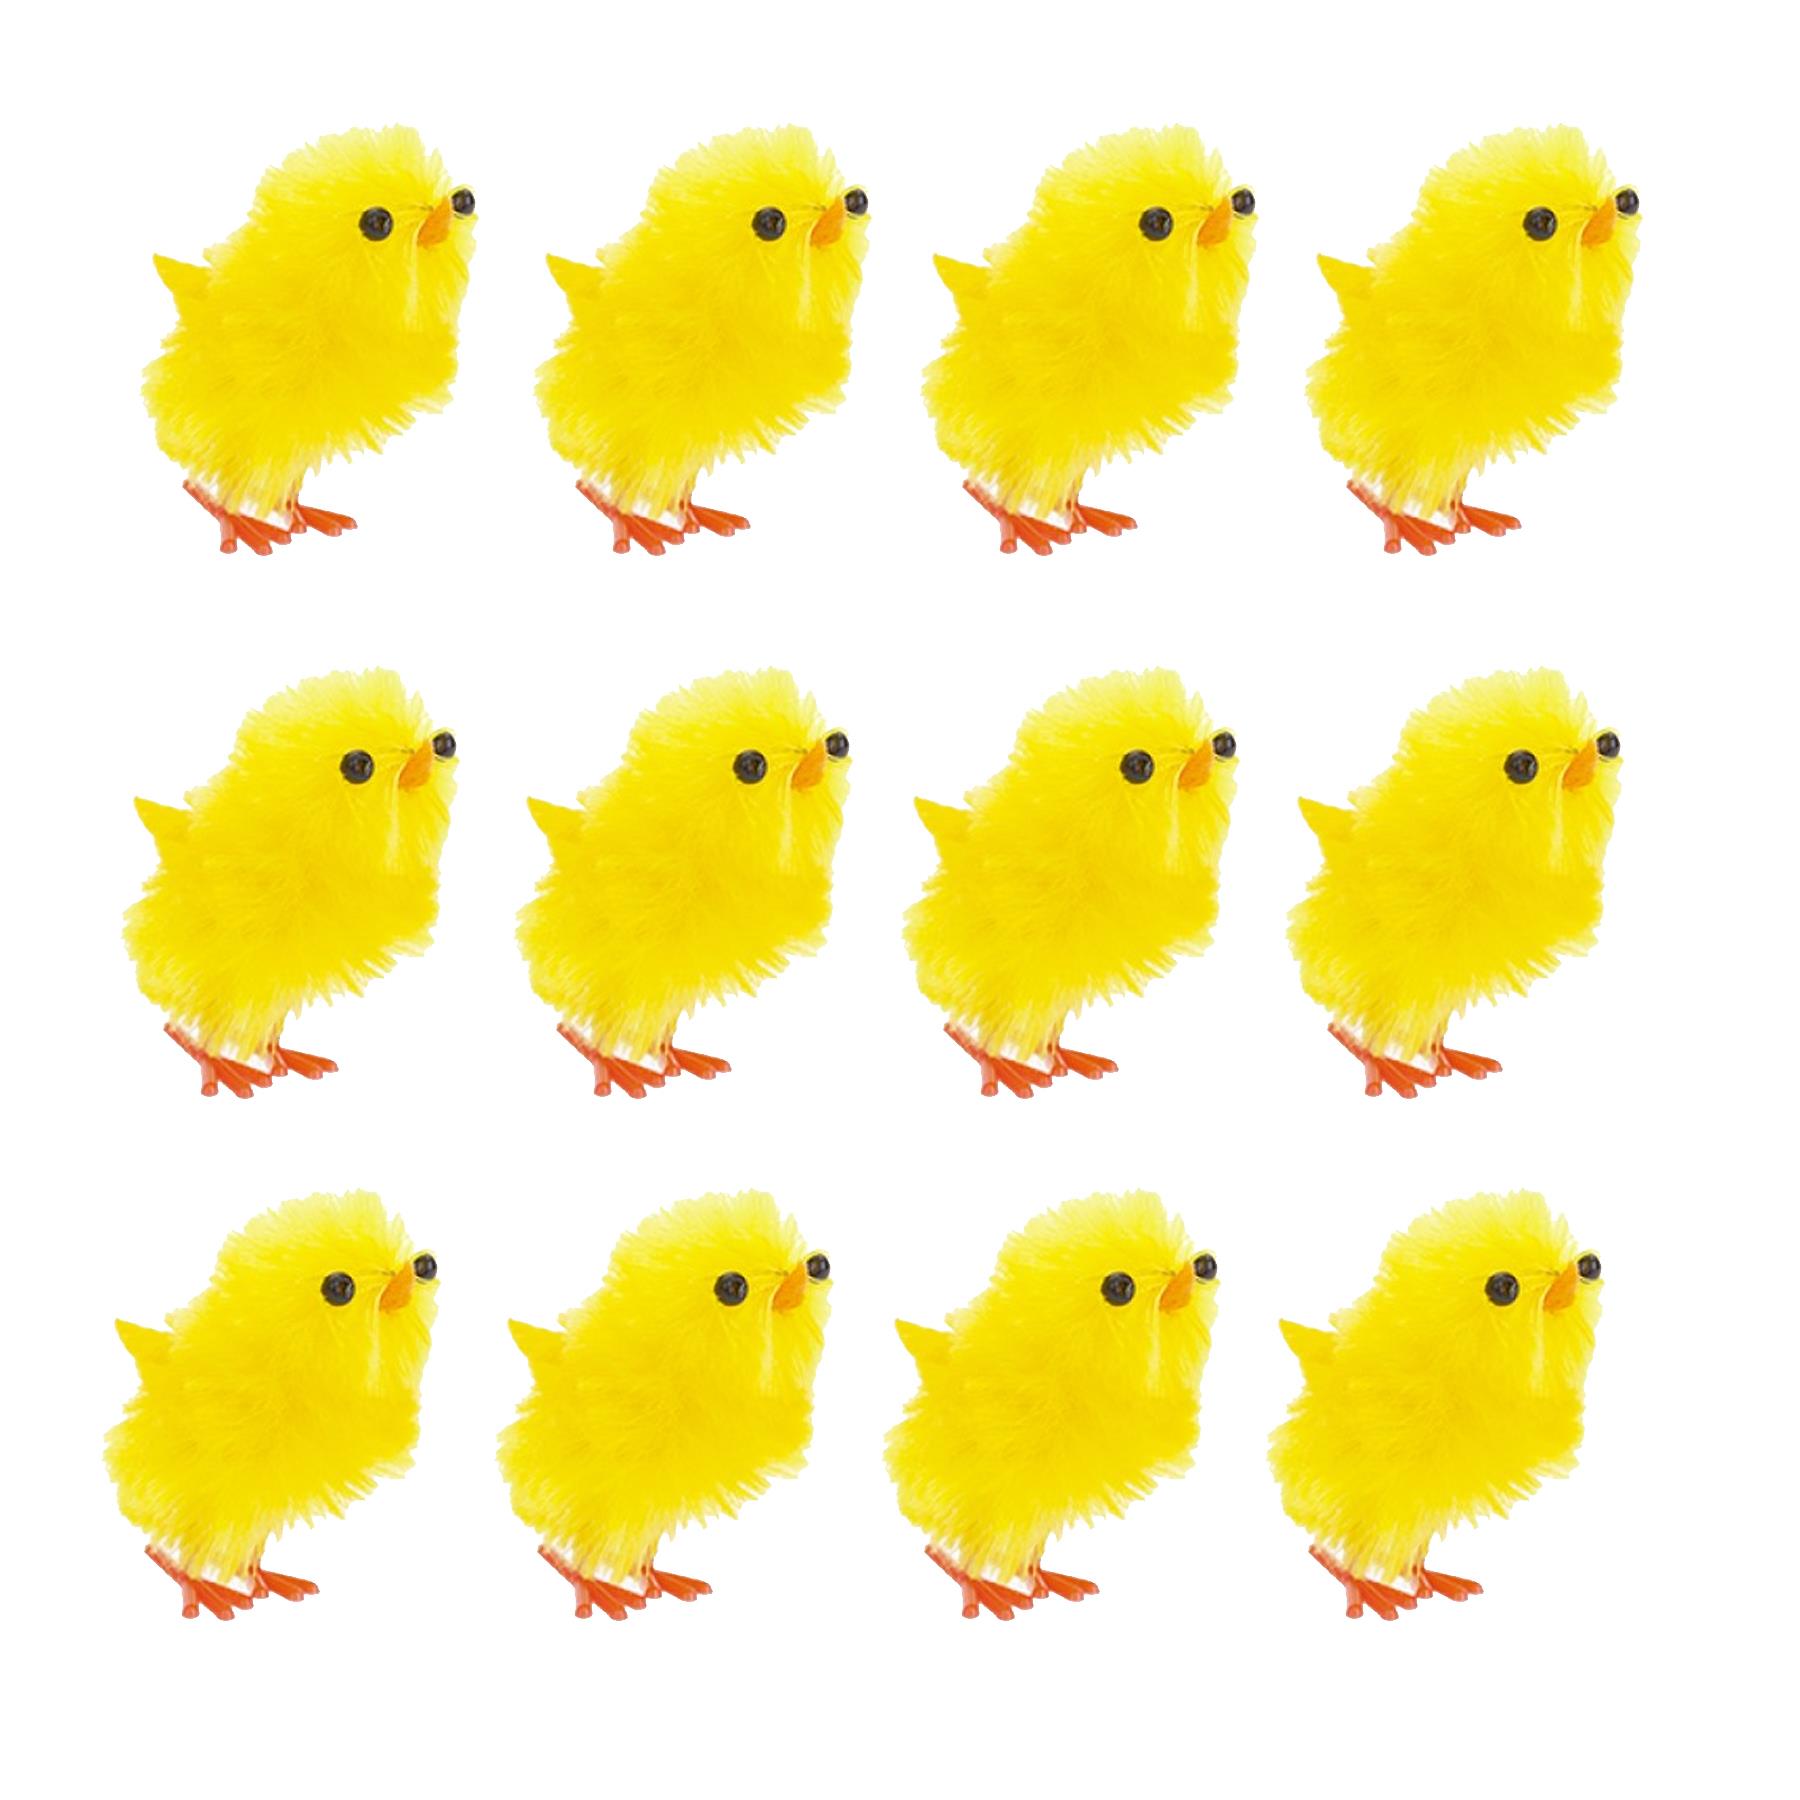 Easter Decorations, Bonnet Making, Arts and Crafts - Mini Chicks Pack of 12